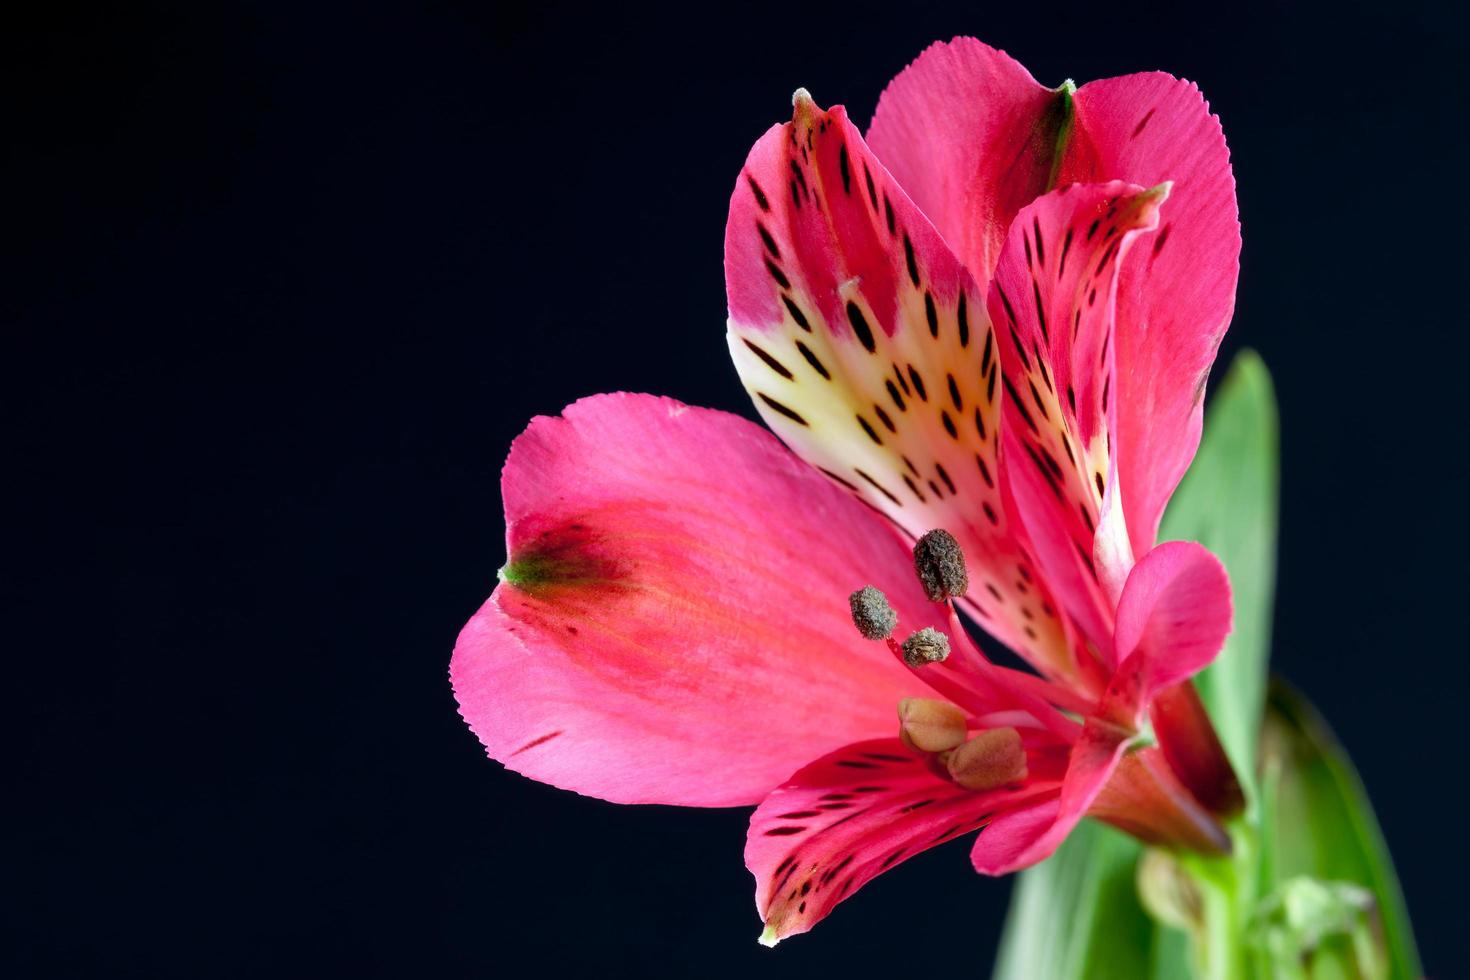 Vibrant red Freesia close-up against a dark background photo